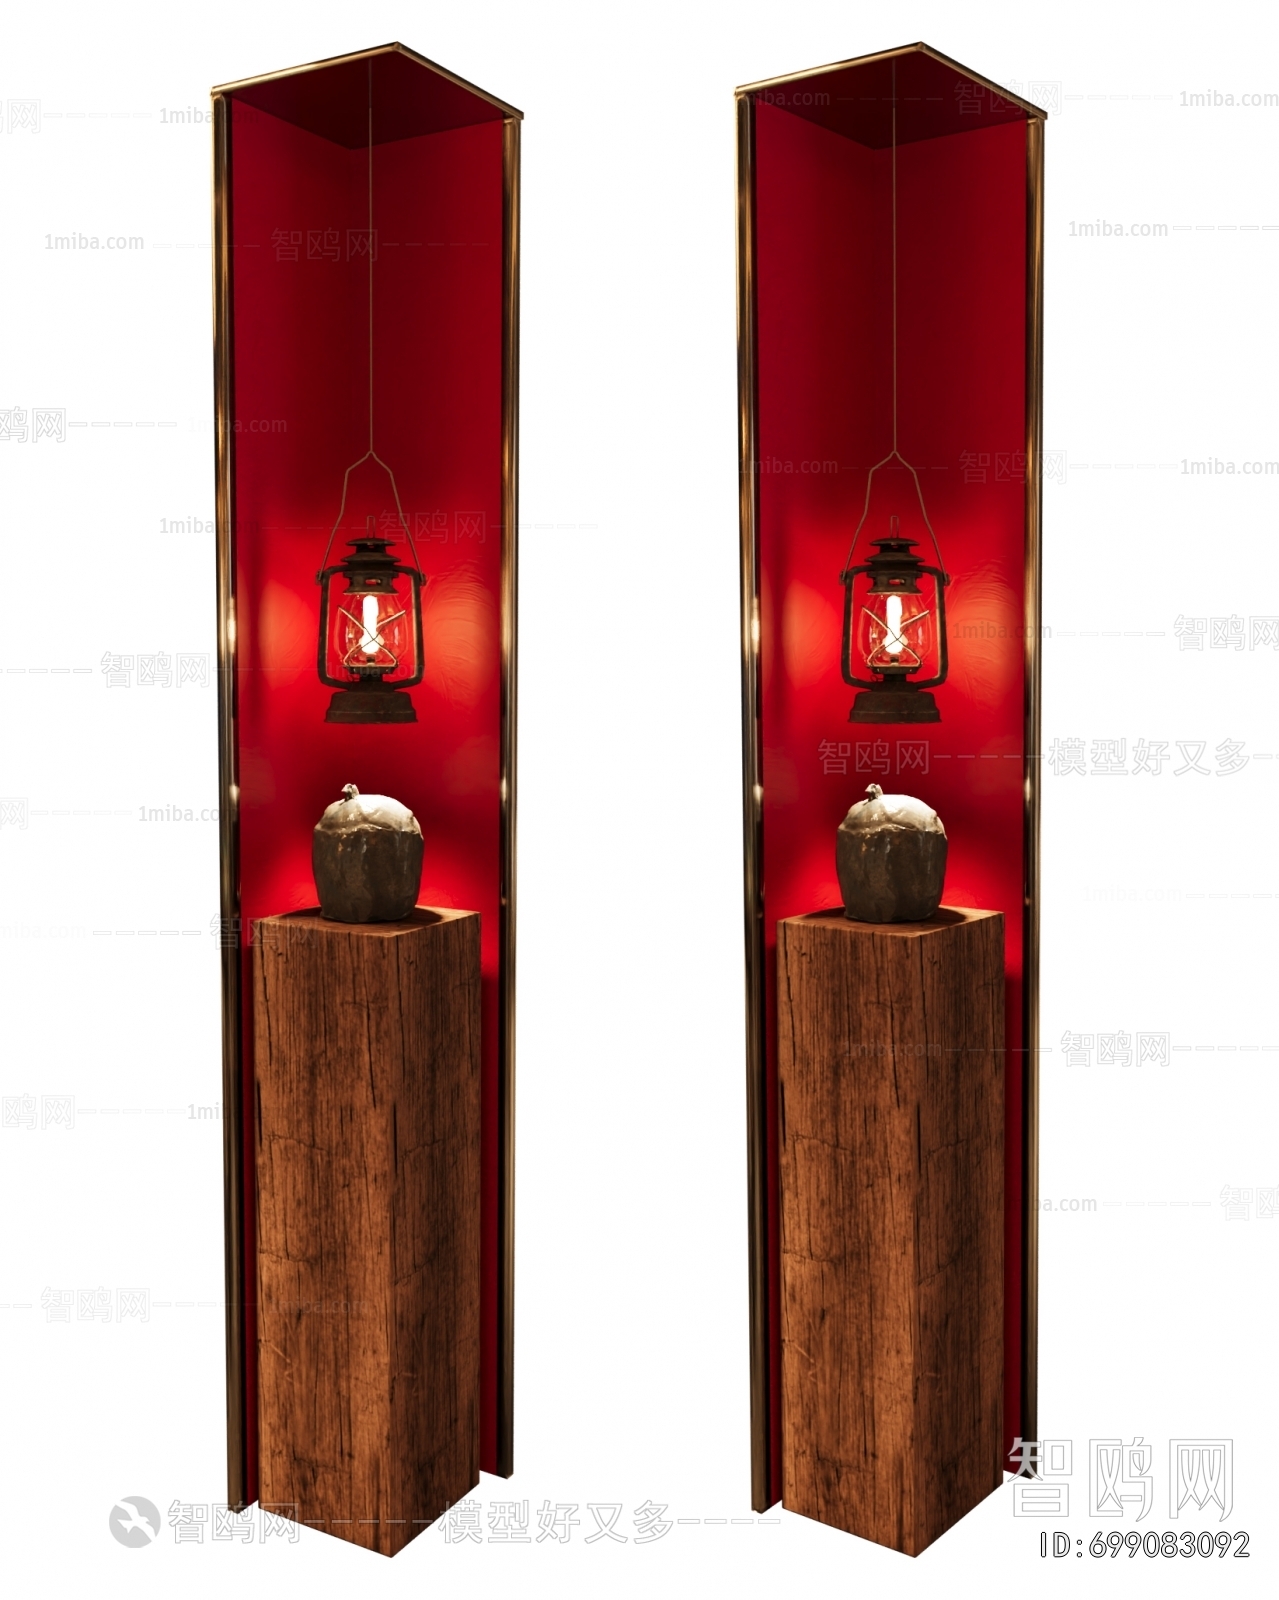 New Chinese Style Decorative Lamp